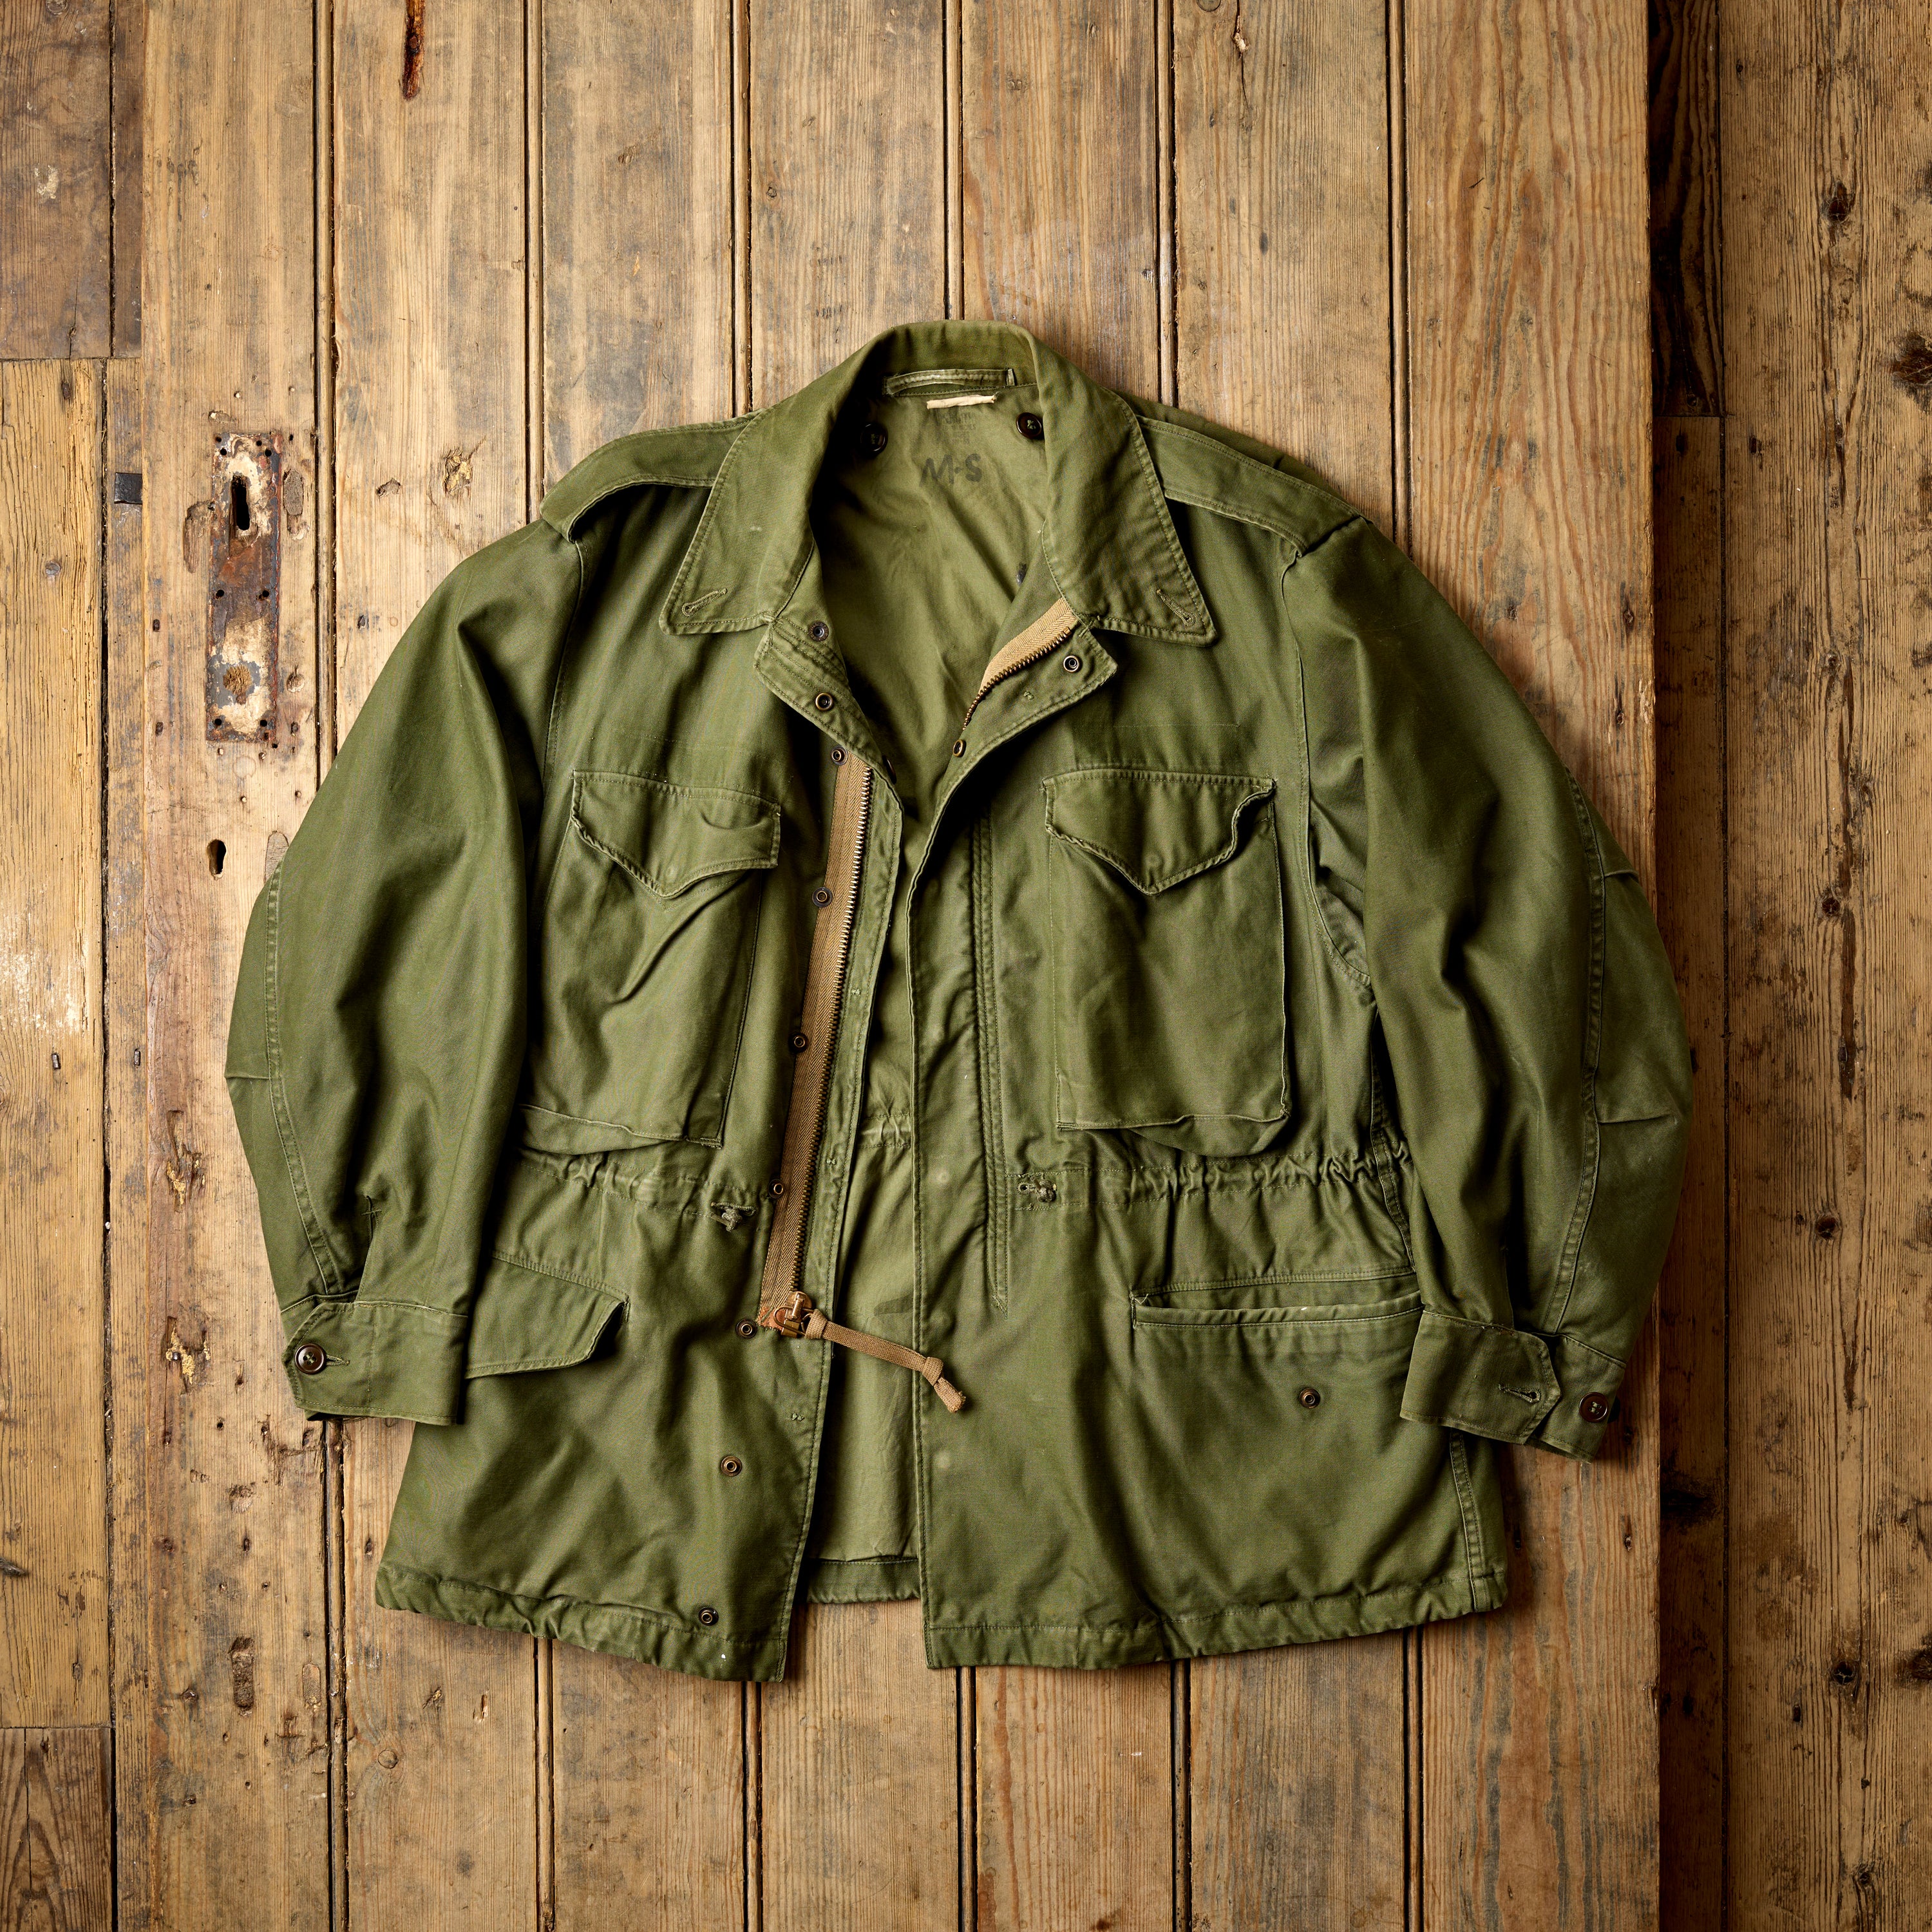 The M-51 Olive Green Field Jacket